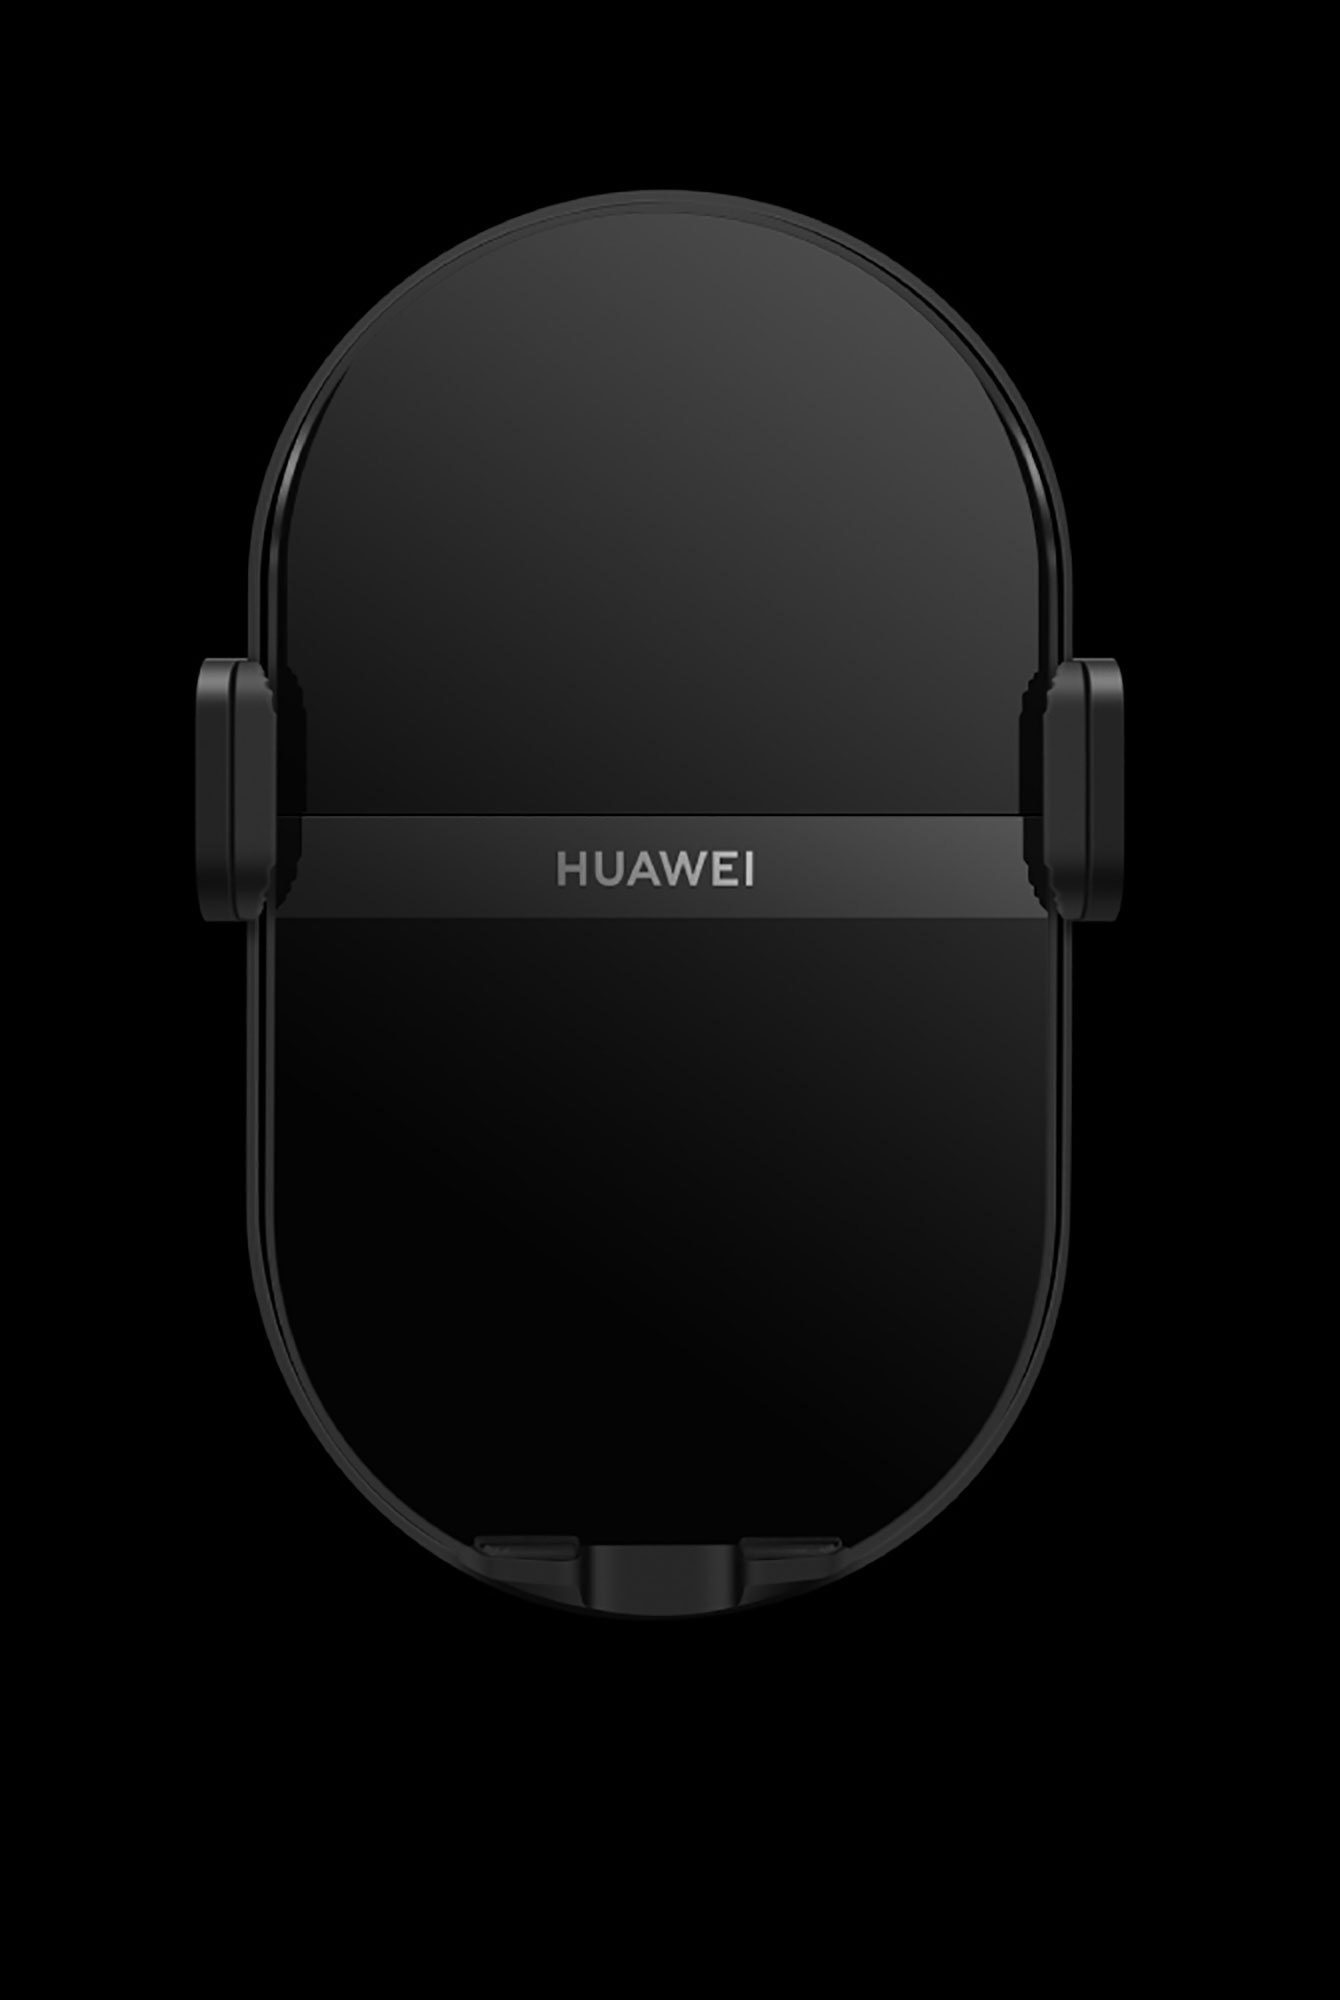 HUAWEI SuperCharge Wireless Car Charger (Max 50 W)